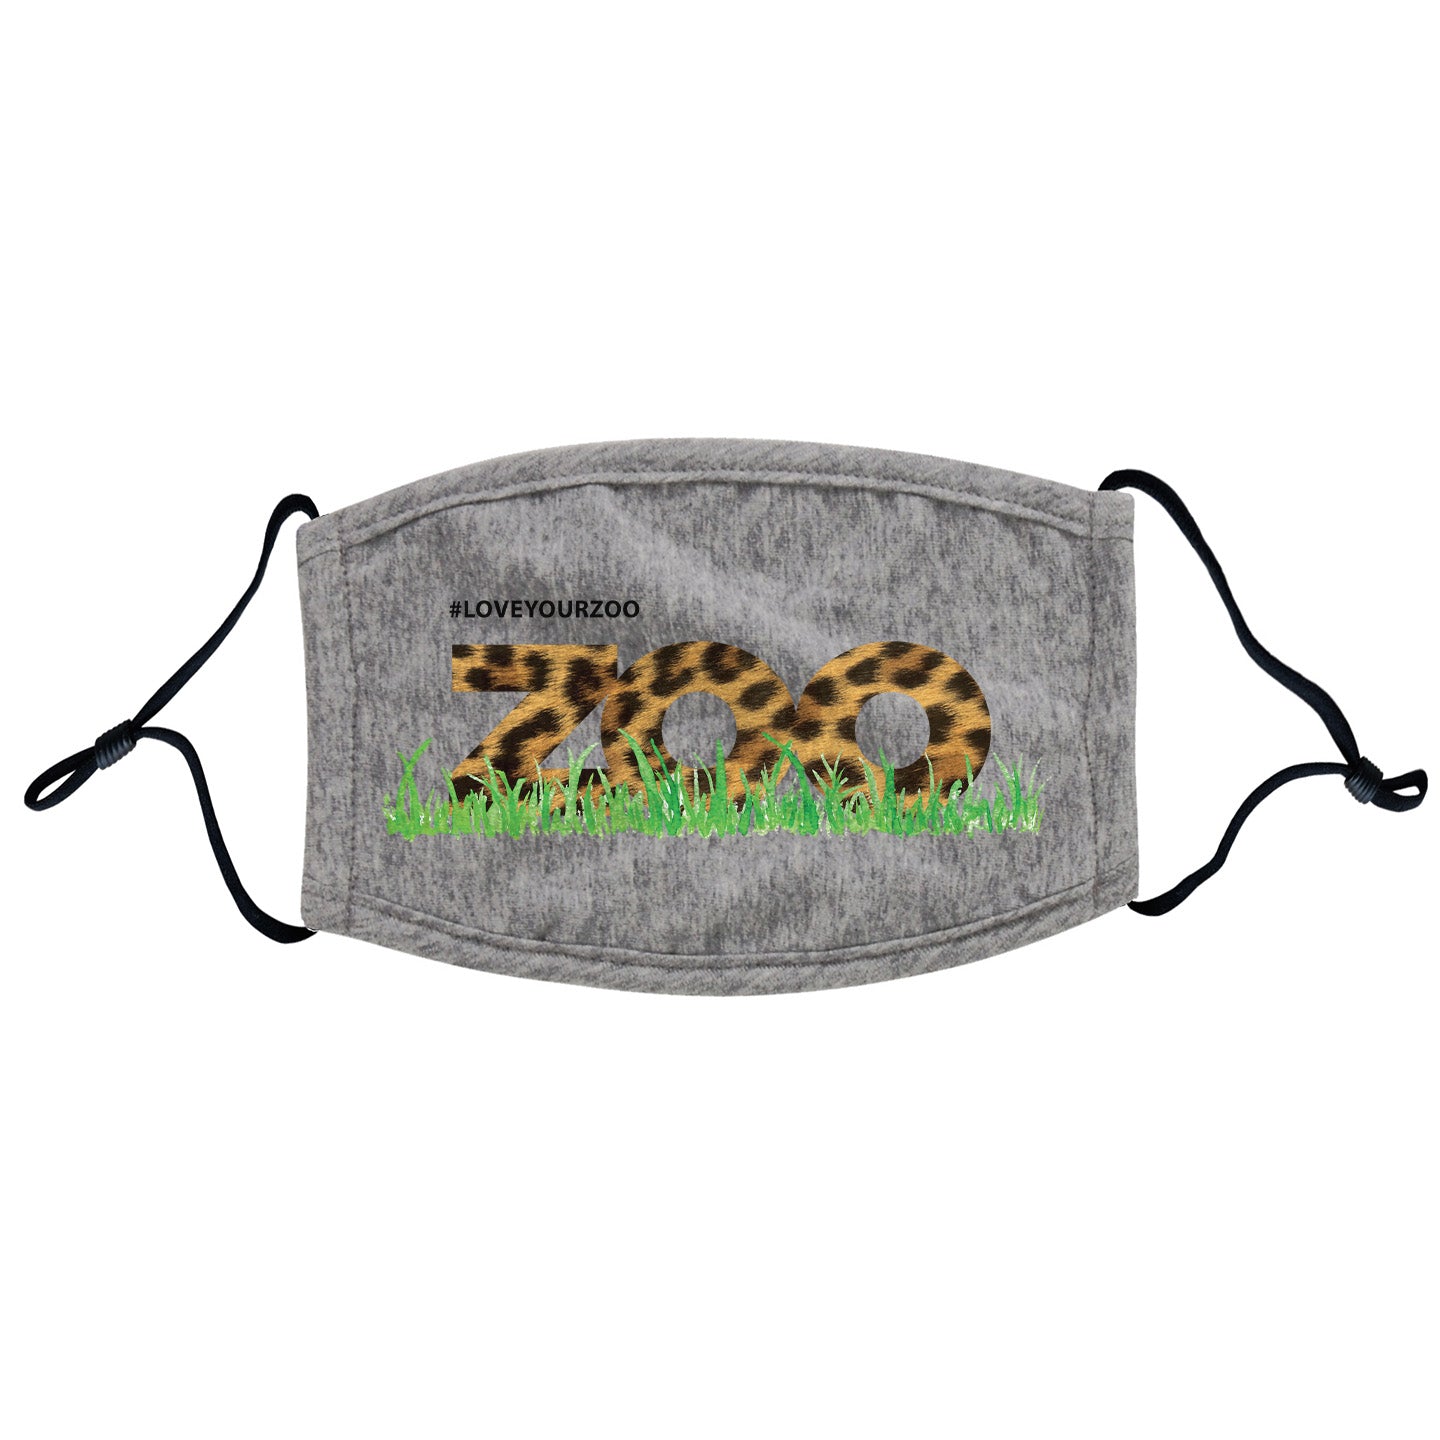 Love Your Zoo - Leopard Pattern Face Mask - Adjustable Ear Loops, Reusable & Washable, Cloth - Animal Pride